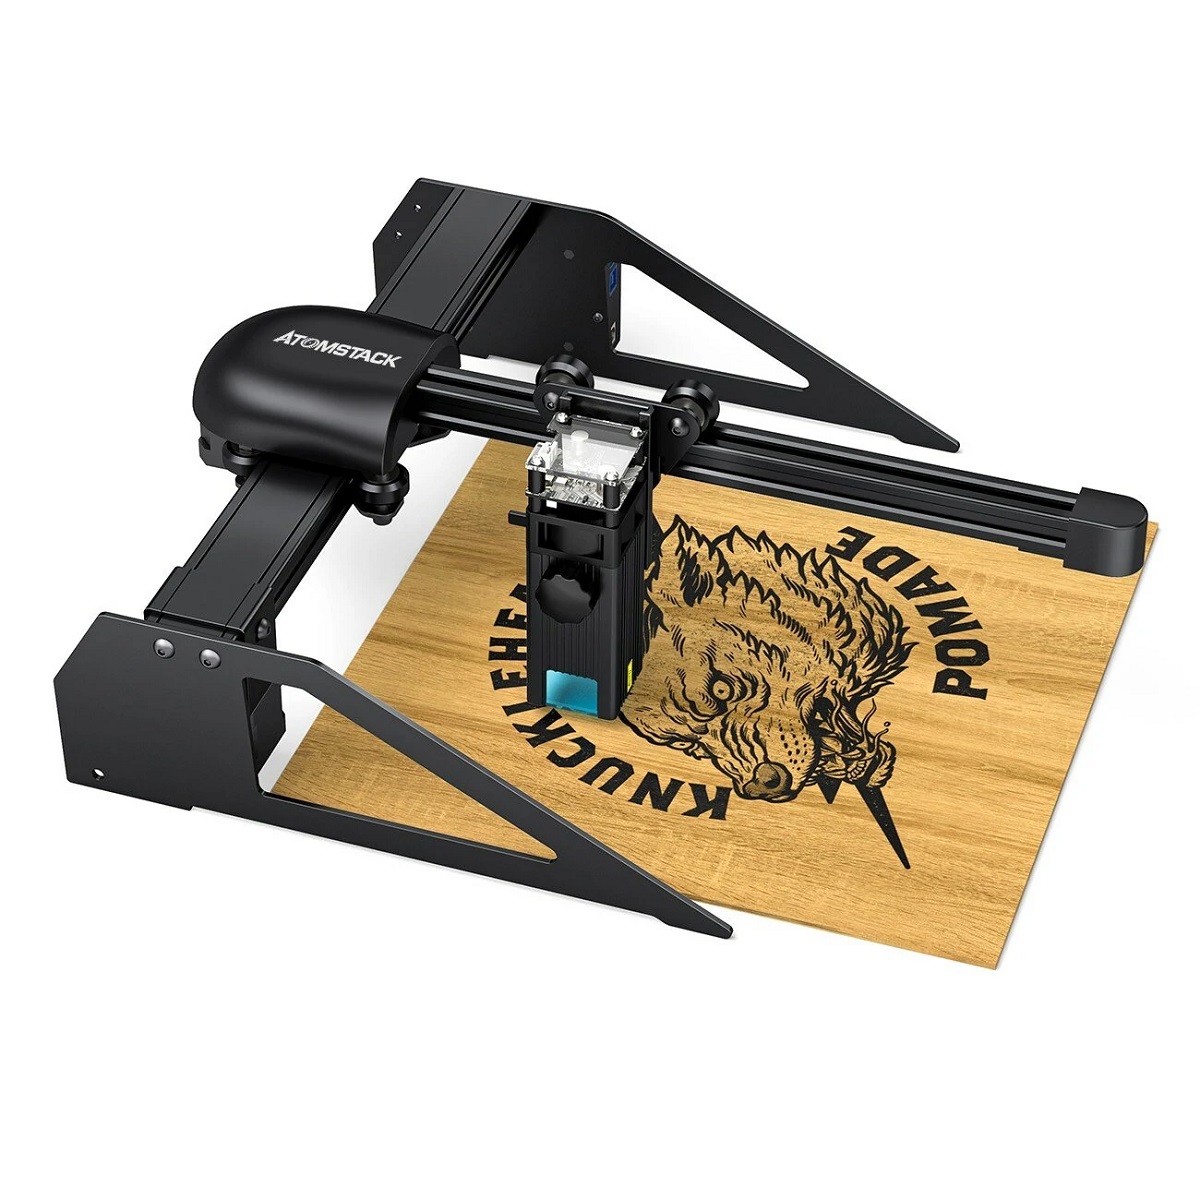 Find [EU DIRECT] ATOMSTACK P7 M30 Portable Laser Engraving Machine Cutter Wood Cutting Single Arm Laser Engraver Eye Protection Metal Engraving for Sale on Gipsybee.com with cryptocurrencies